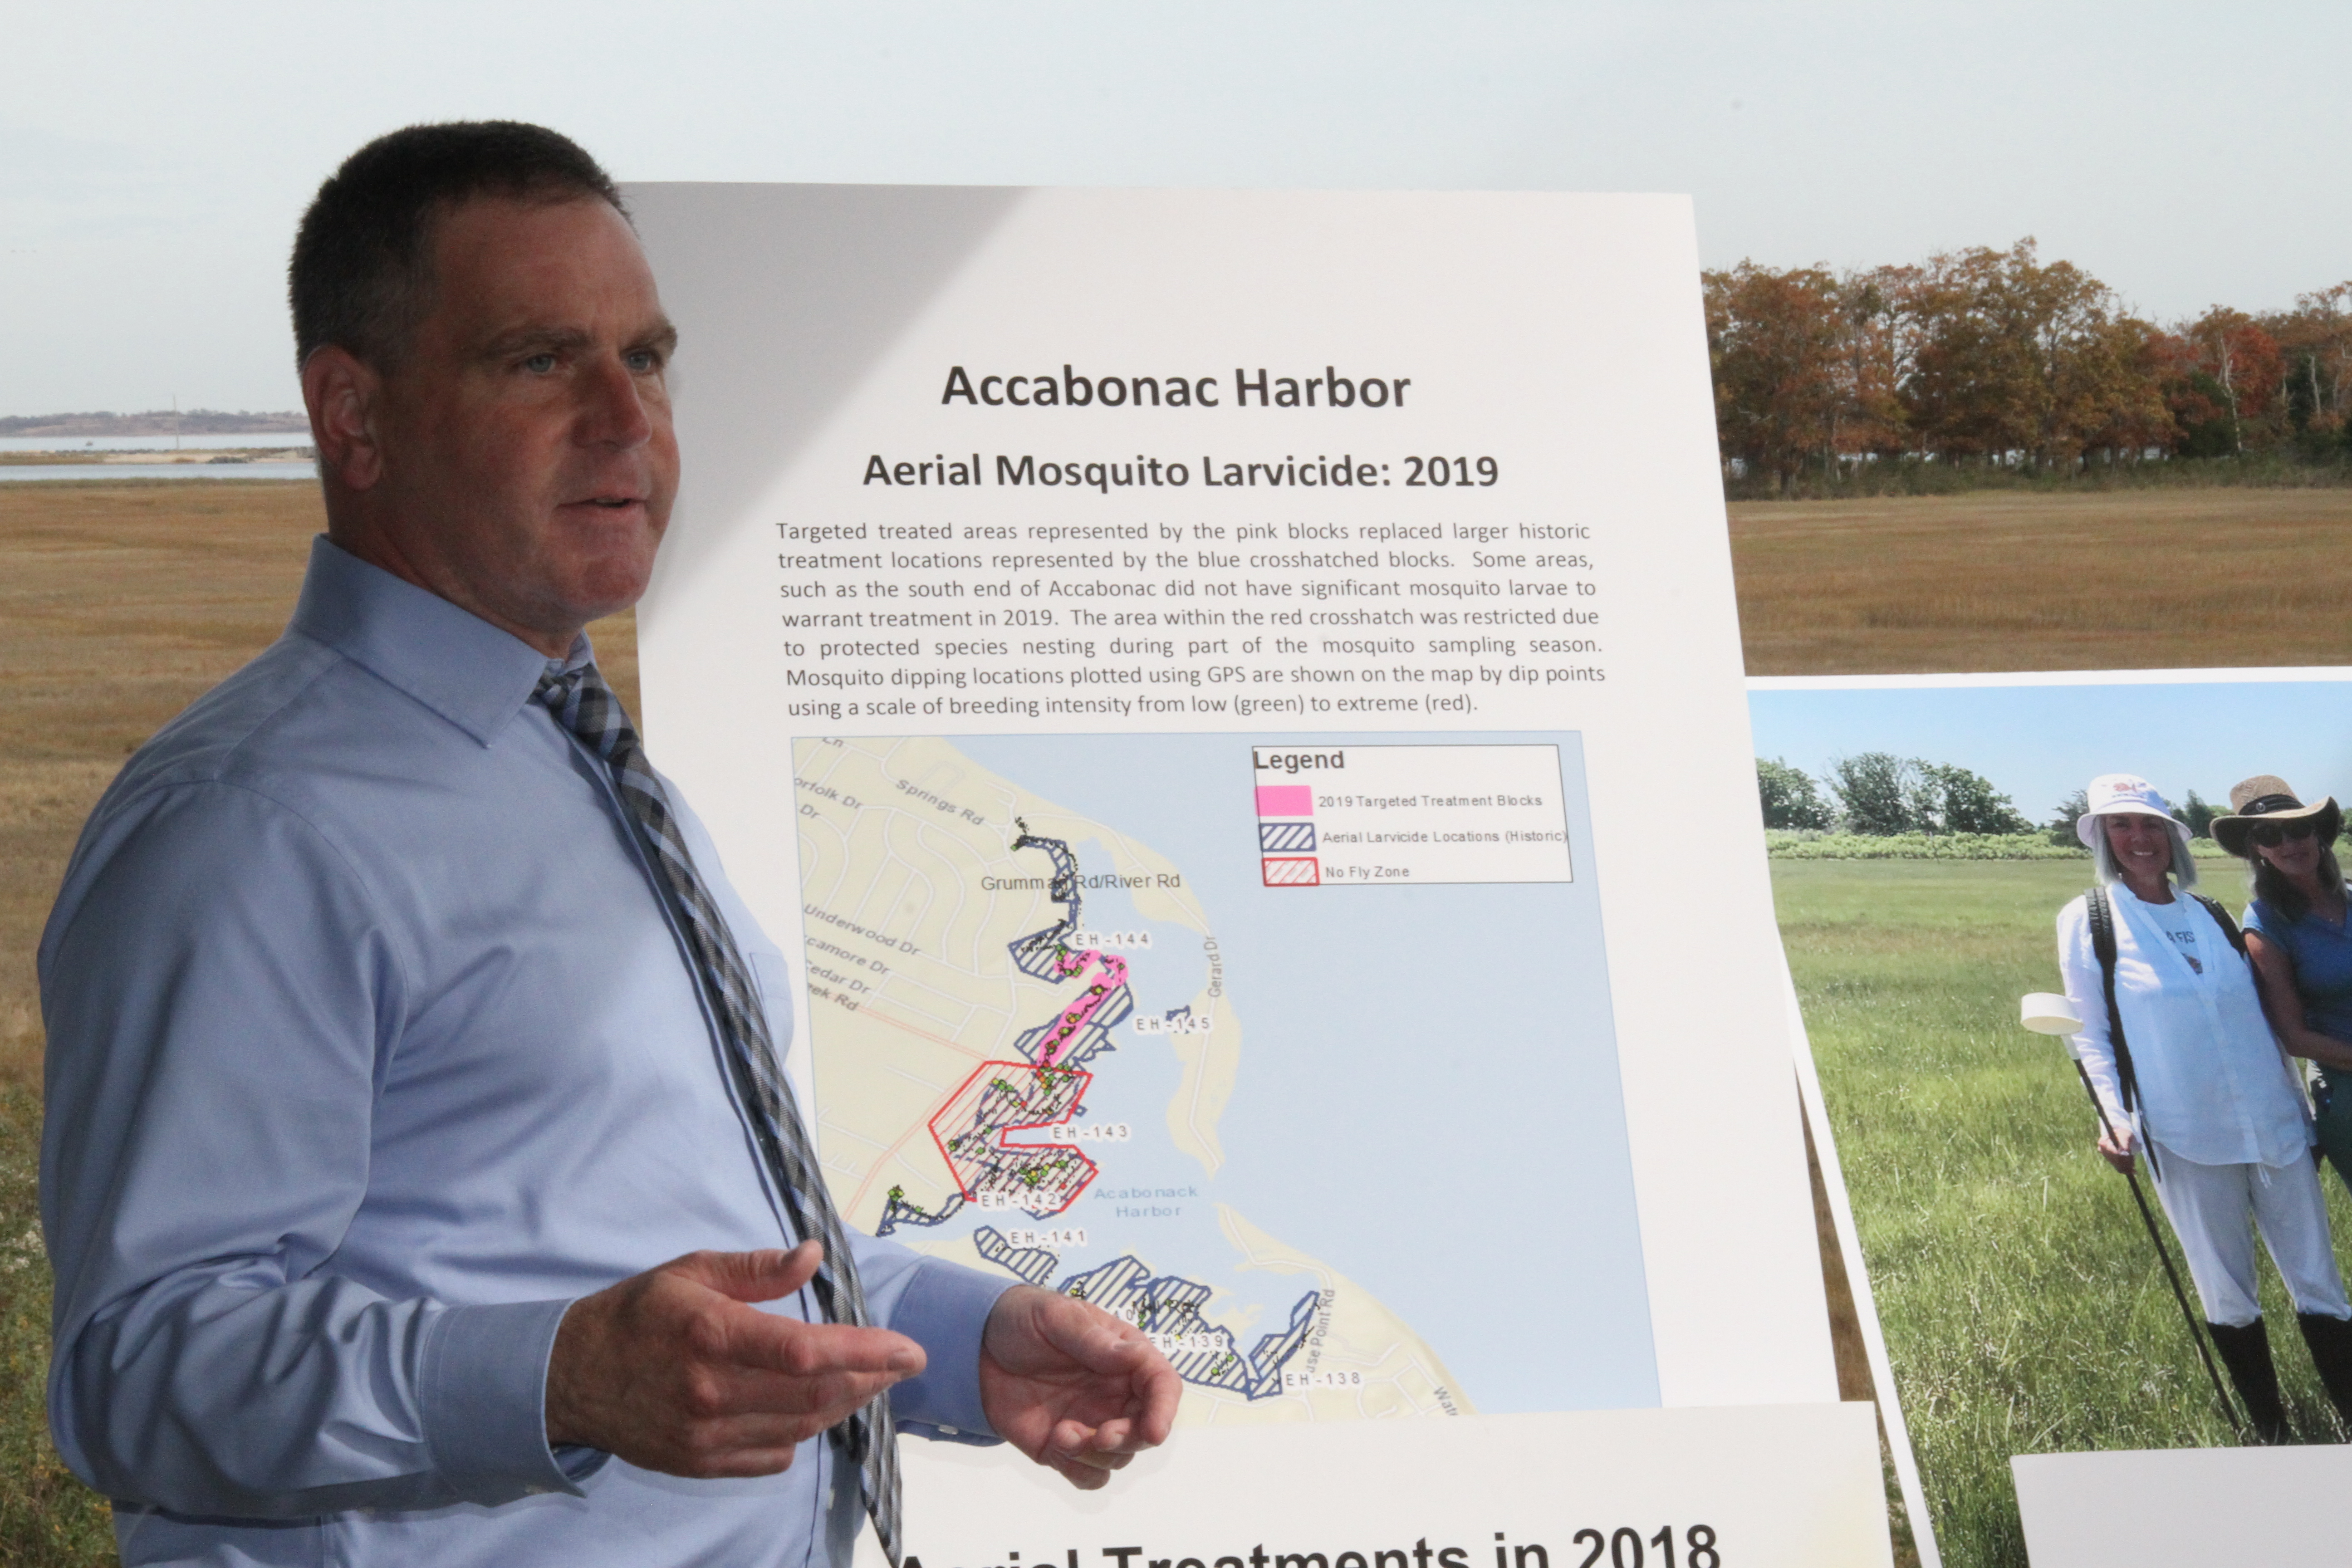 Suffolk County and East Hampton Town officials this week applauded the benefits that an East Hampton Town Trustees-led effort to reduce mosquito spraying over Accabonac Harbor has brought.